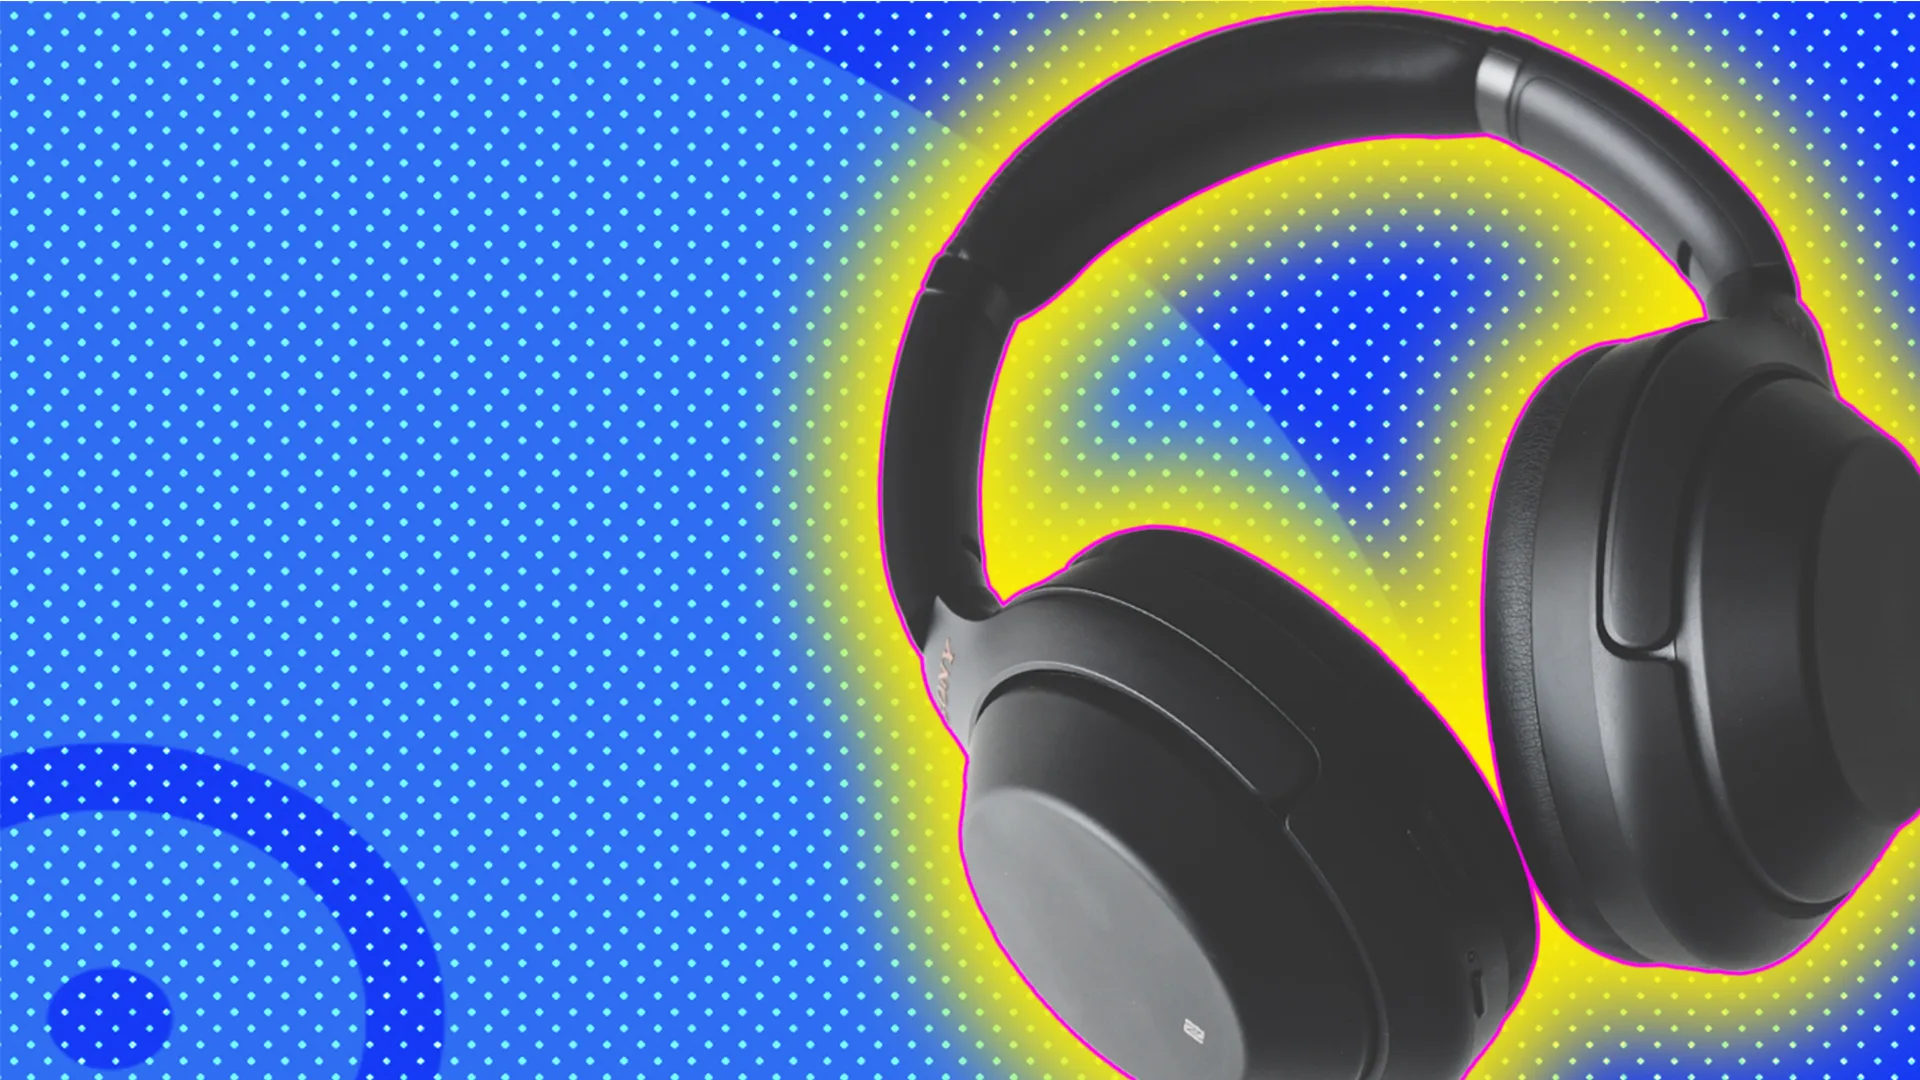 Headphones with a yellow glow on a blue background